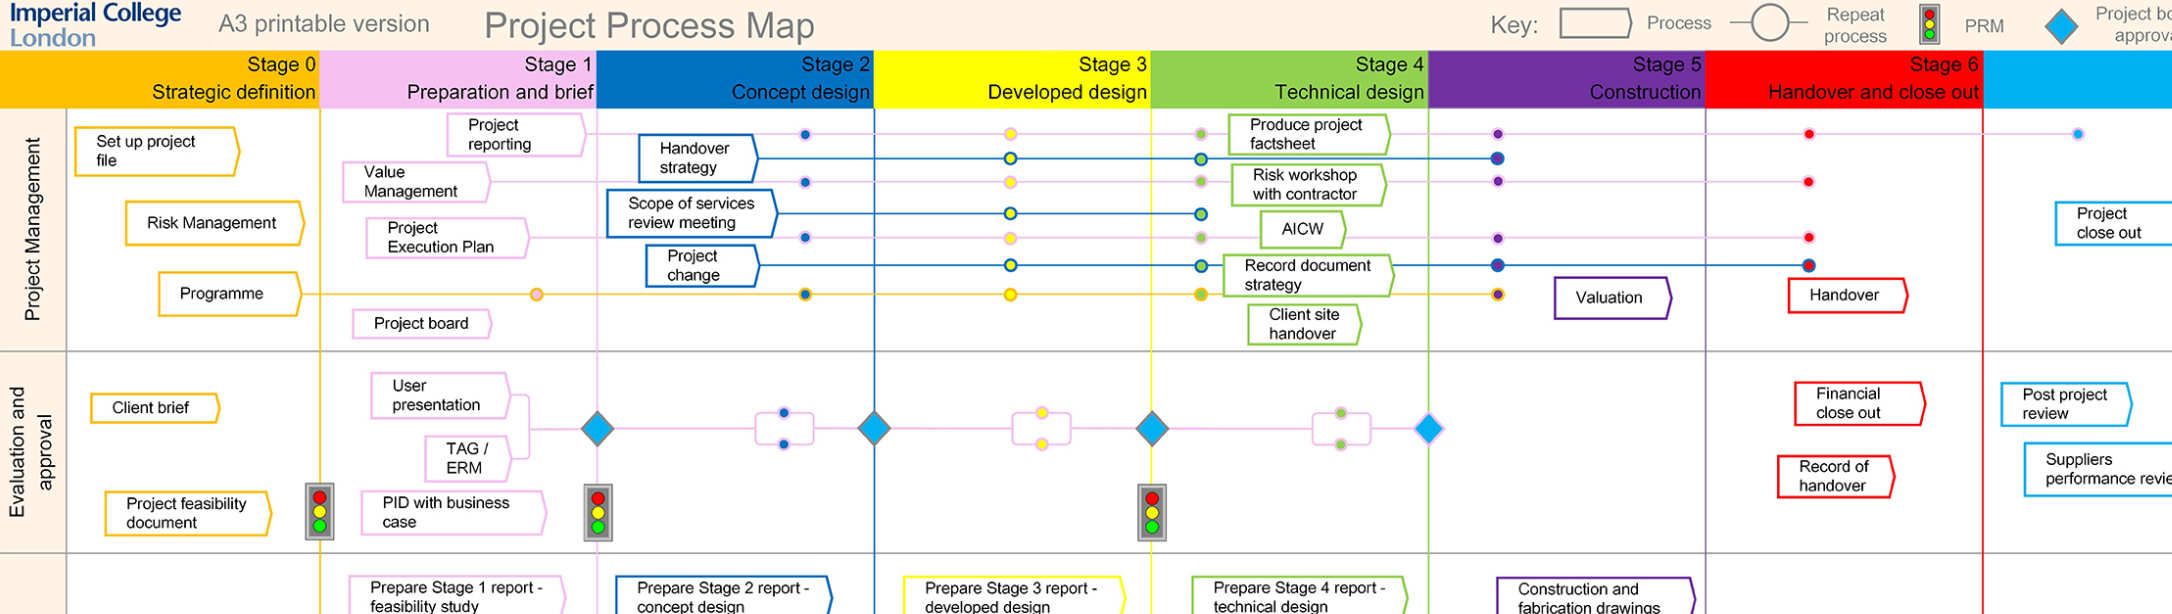 Project Process Map | Administration and support services | Imperial ...